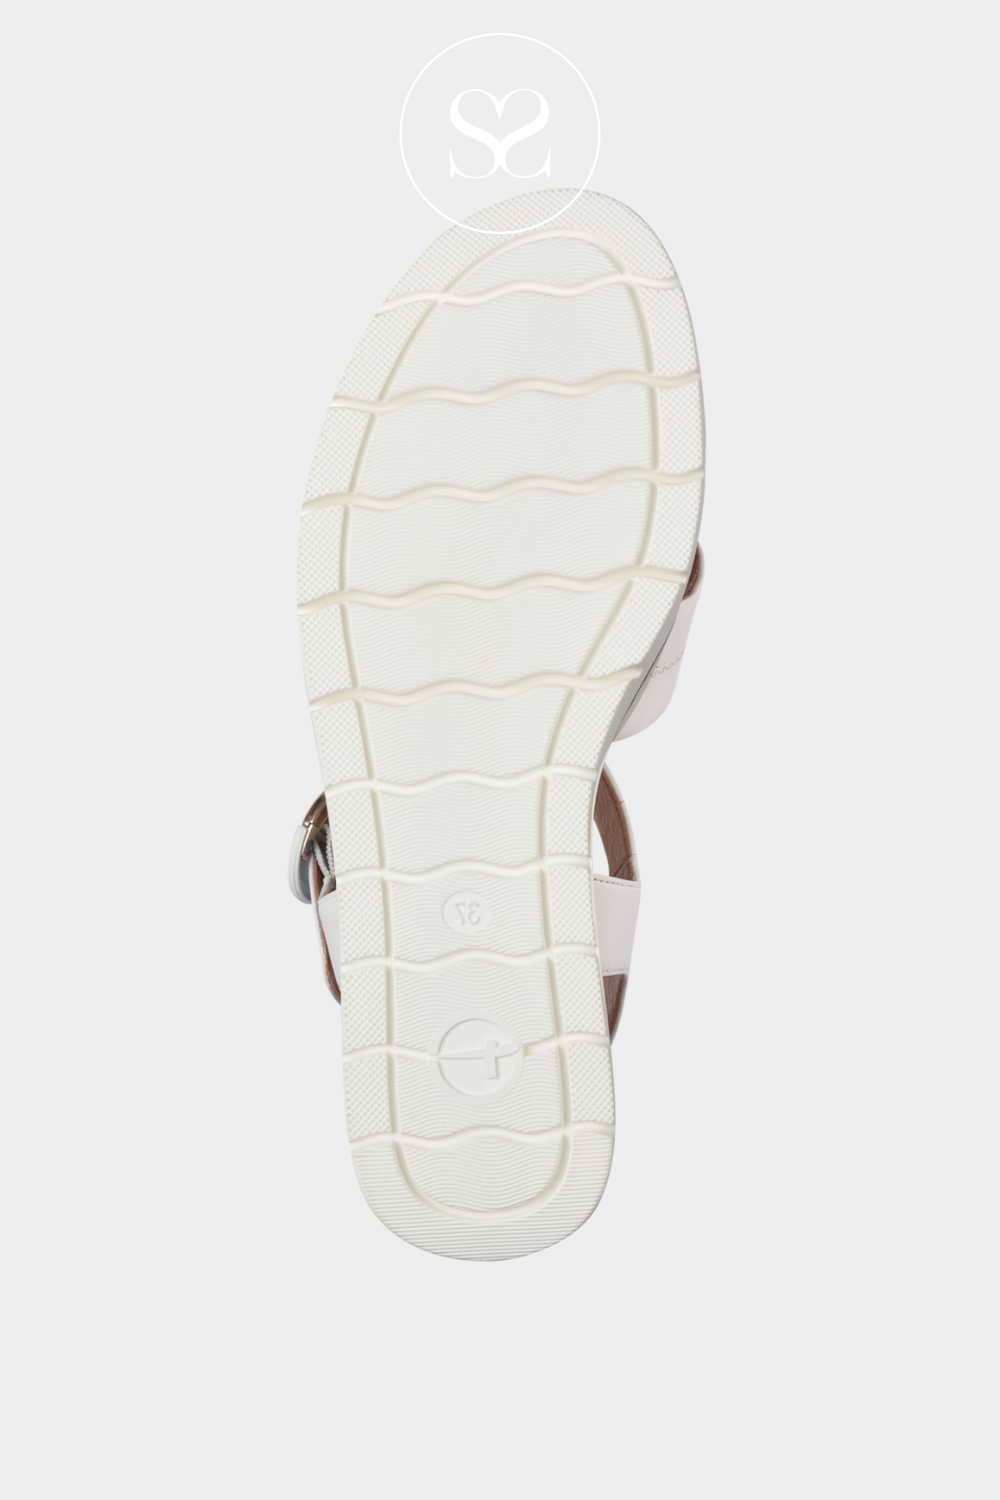 TAMARIS 1-28202-42 WHITE LEATHER WEDGE SANDAL WITH CRISS CROSS STRAPS AND ADJUSTABLE ANKLE STRAPTAMARIS 1-28202-42 WHITE LEATHER WEDGE SANDAL WITH CRISS CROSS STRAPS AND ADJUSTABLE ANKLE STRAP